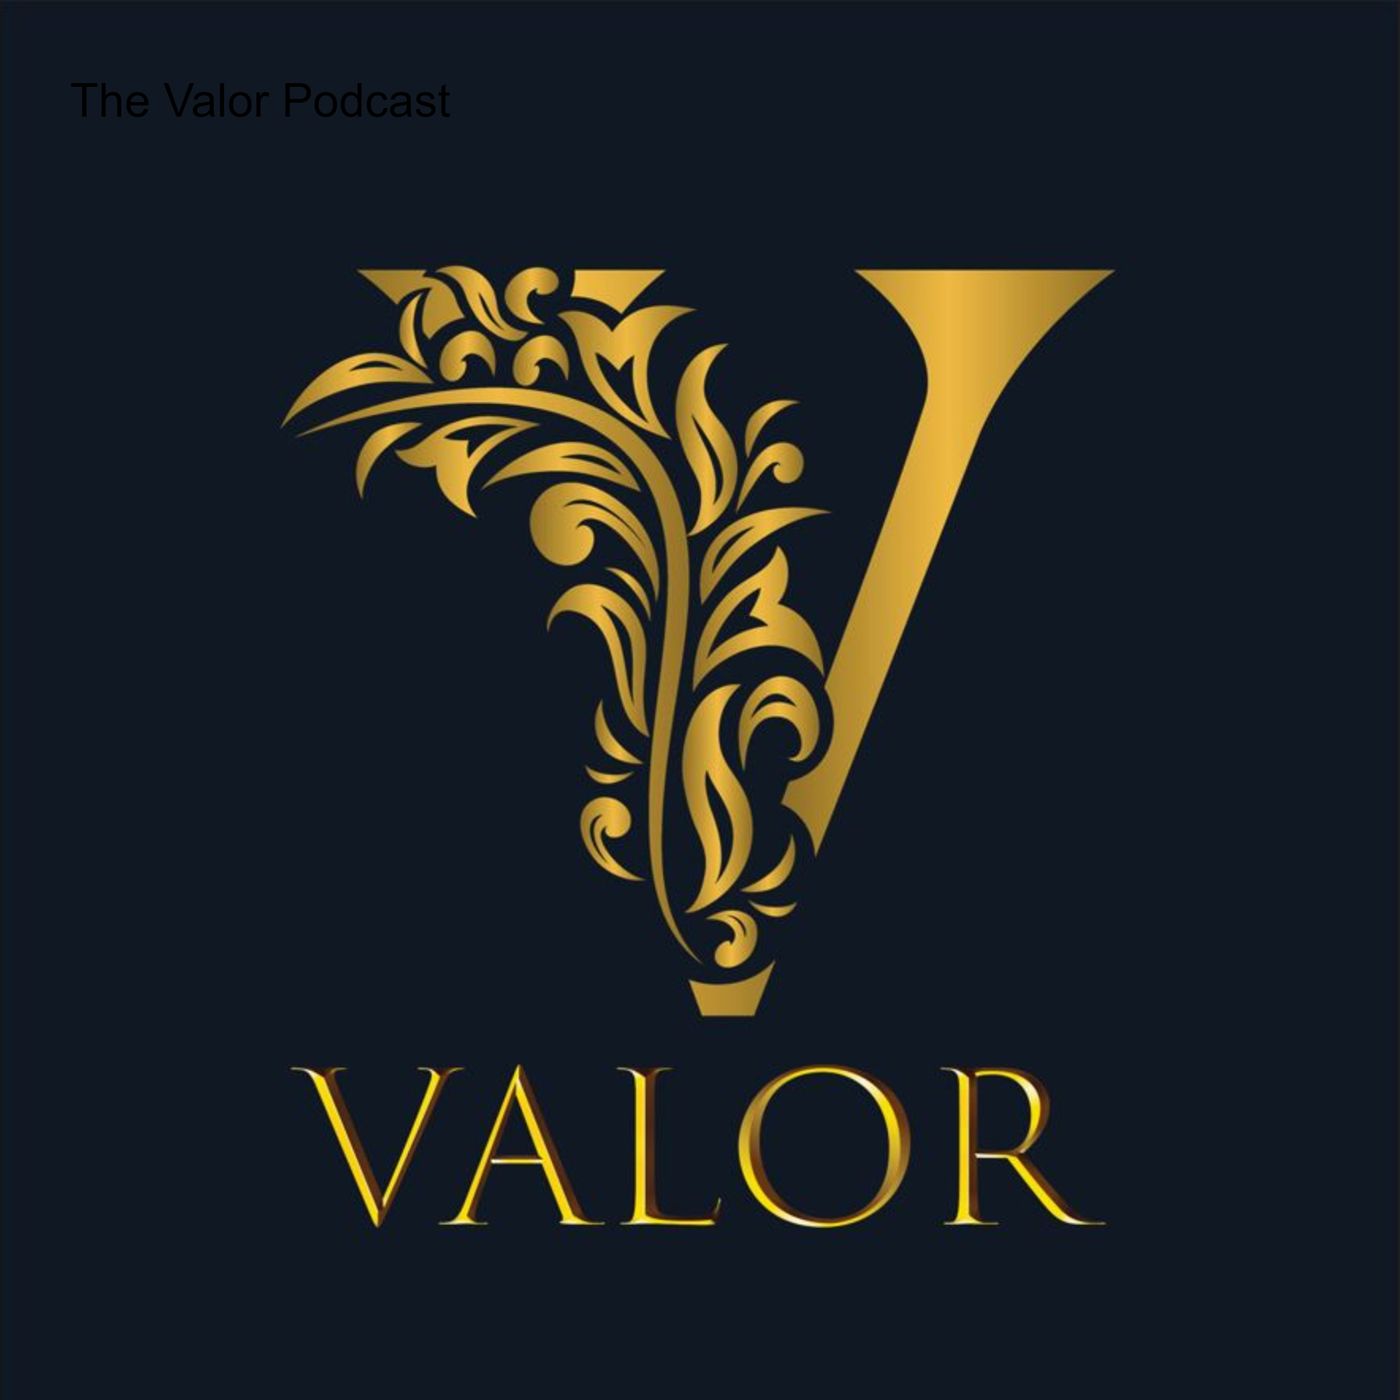 The Valor Podcast